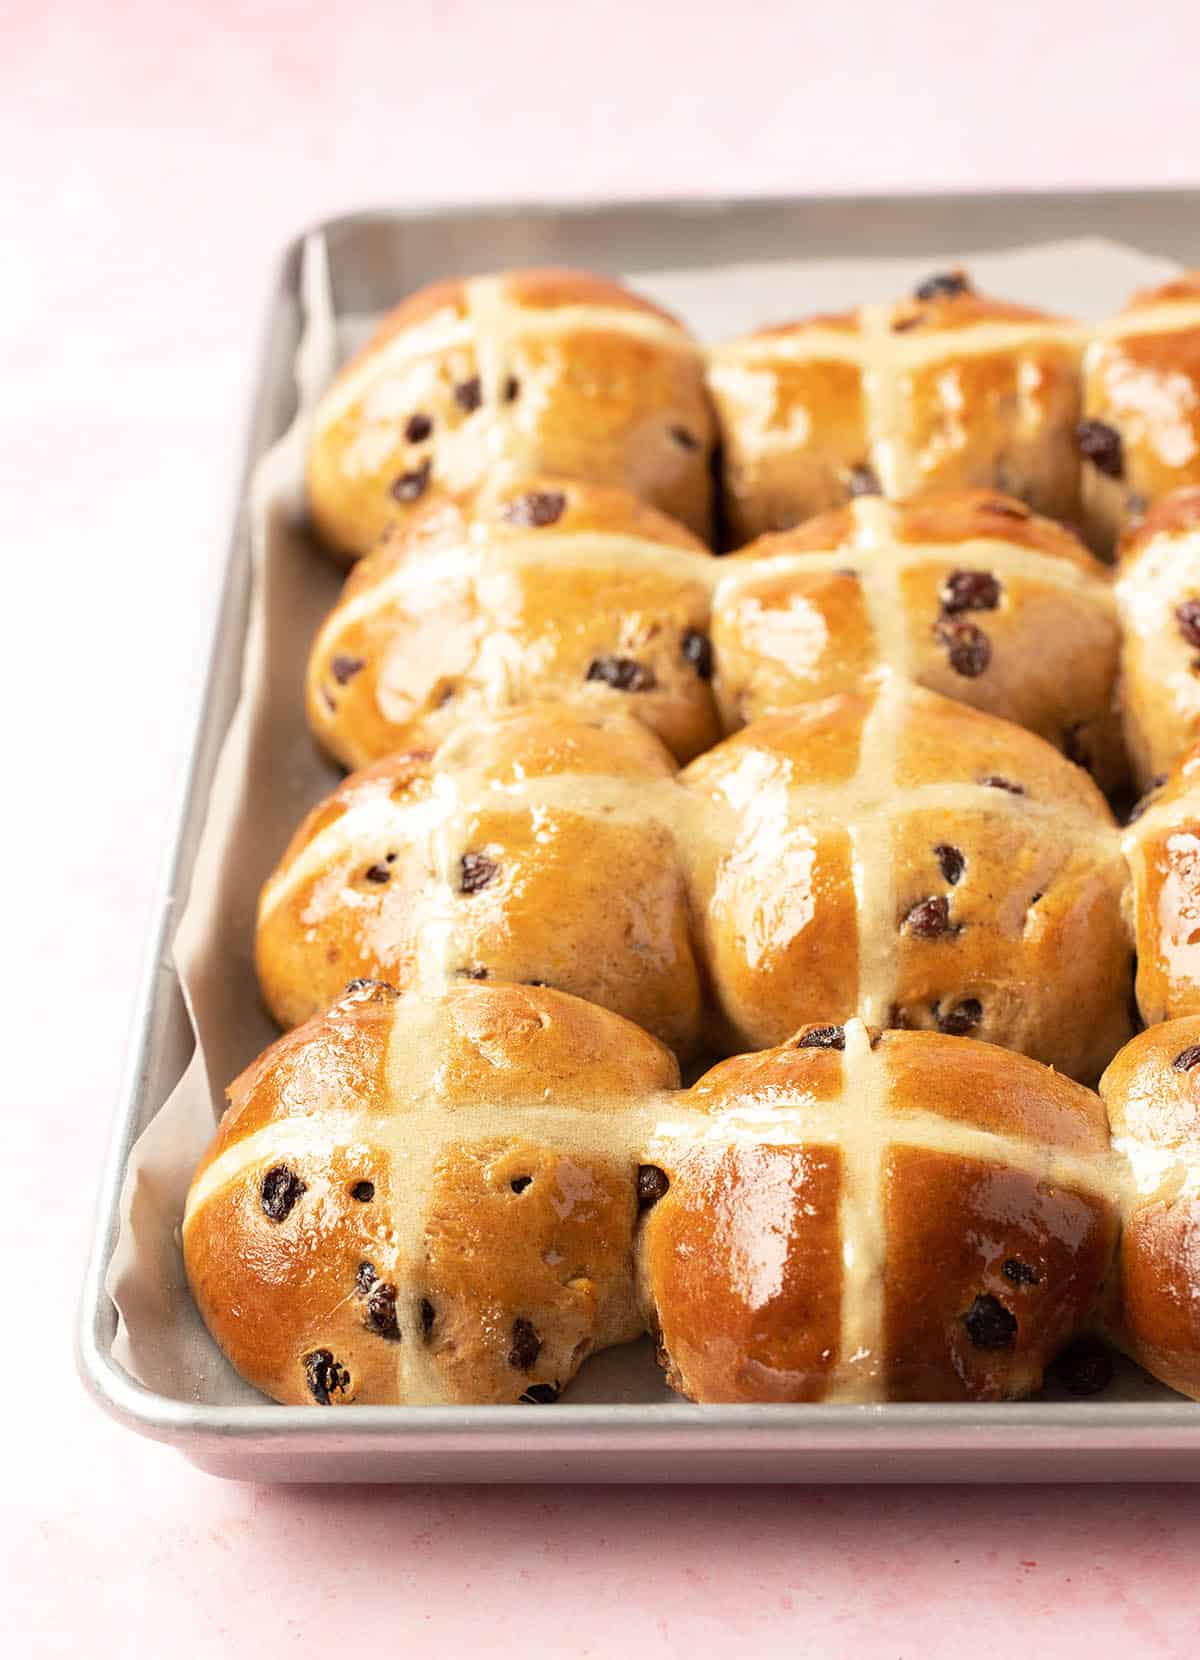 A pan filled with freshly glazed hot cross buns on a pink background.